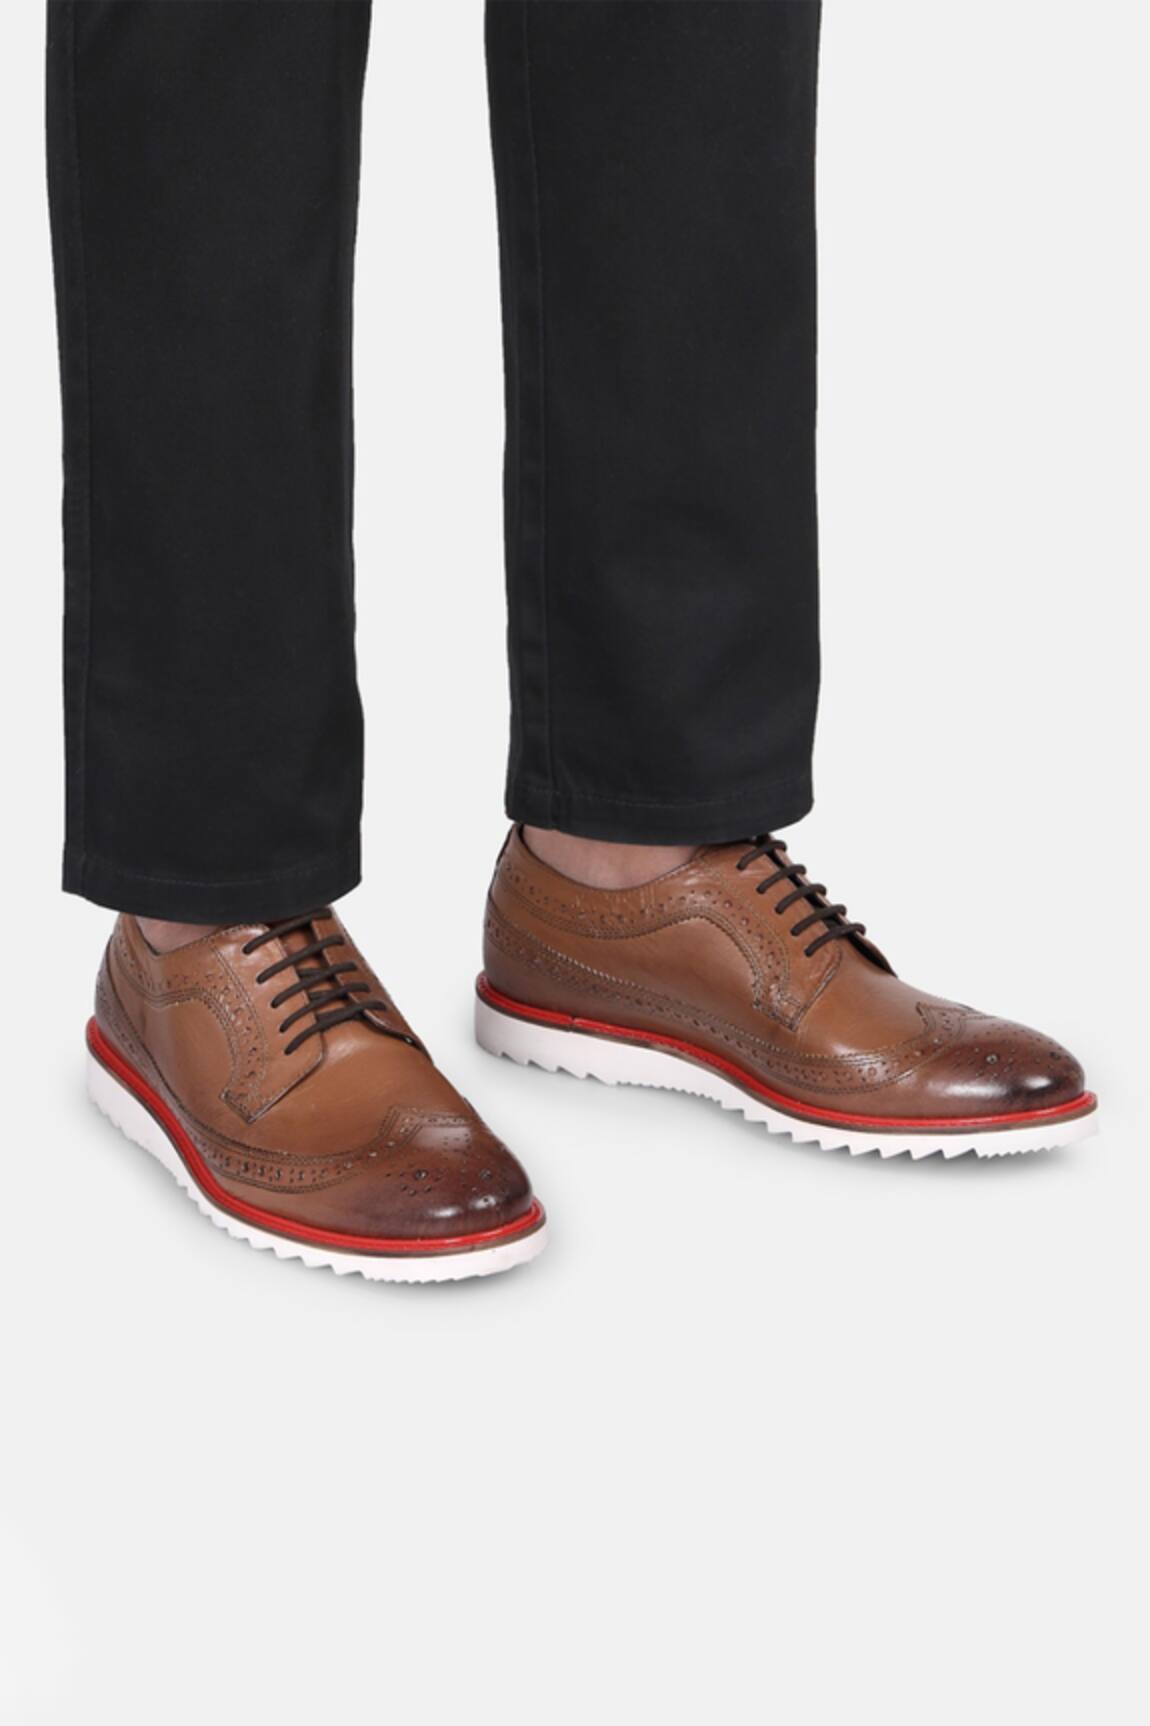 Hats Off Accessories Round Toe Brogue Shoes